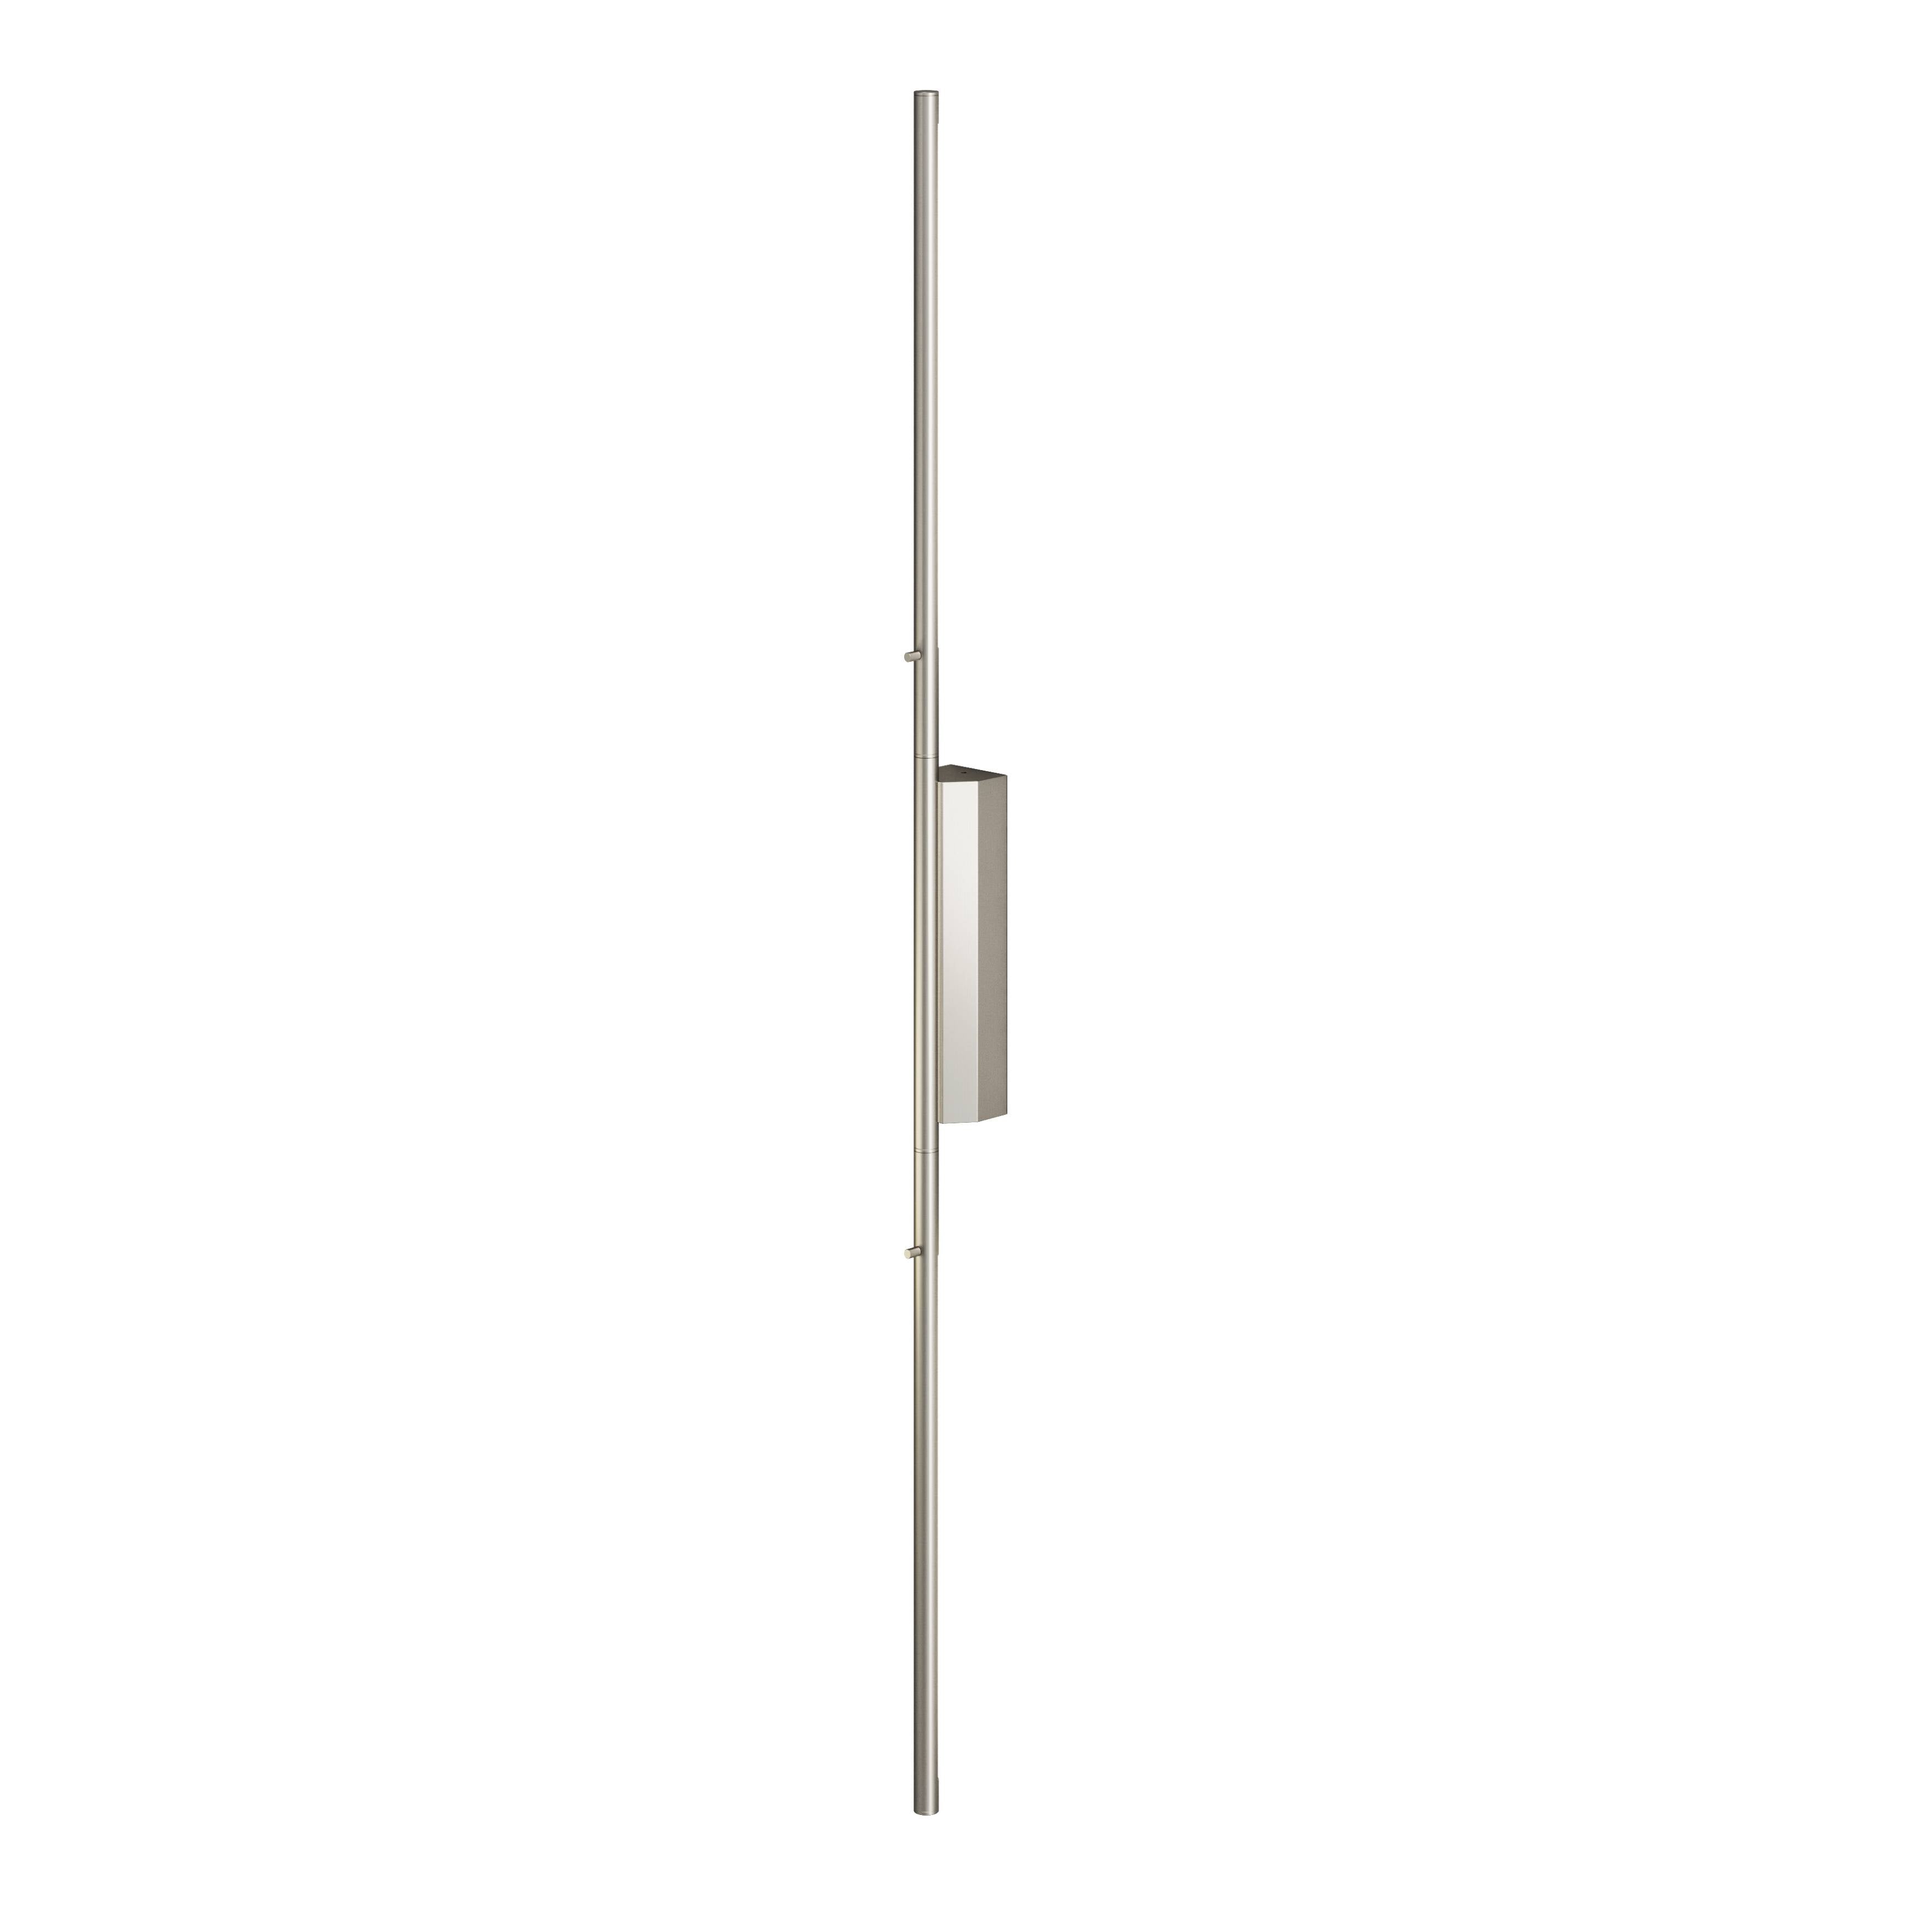 IP Link Double Reading Wall Light: Large - 51.2